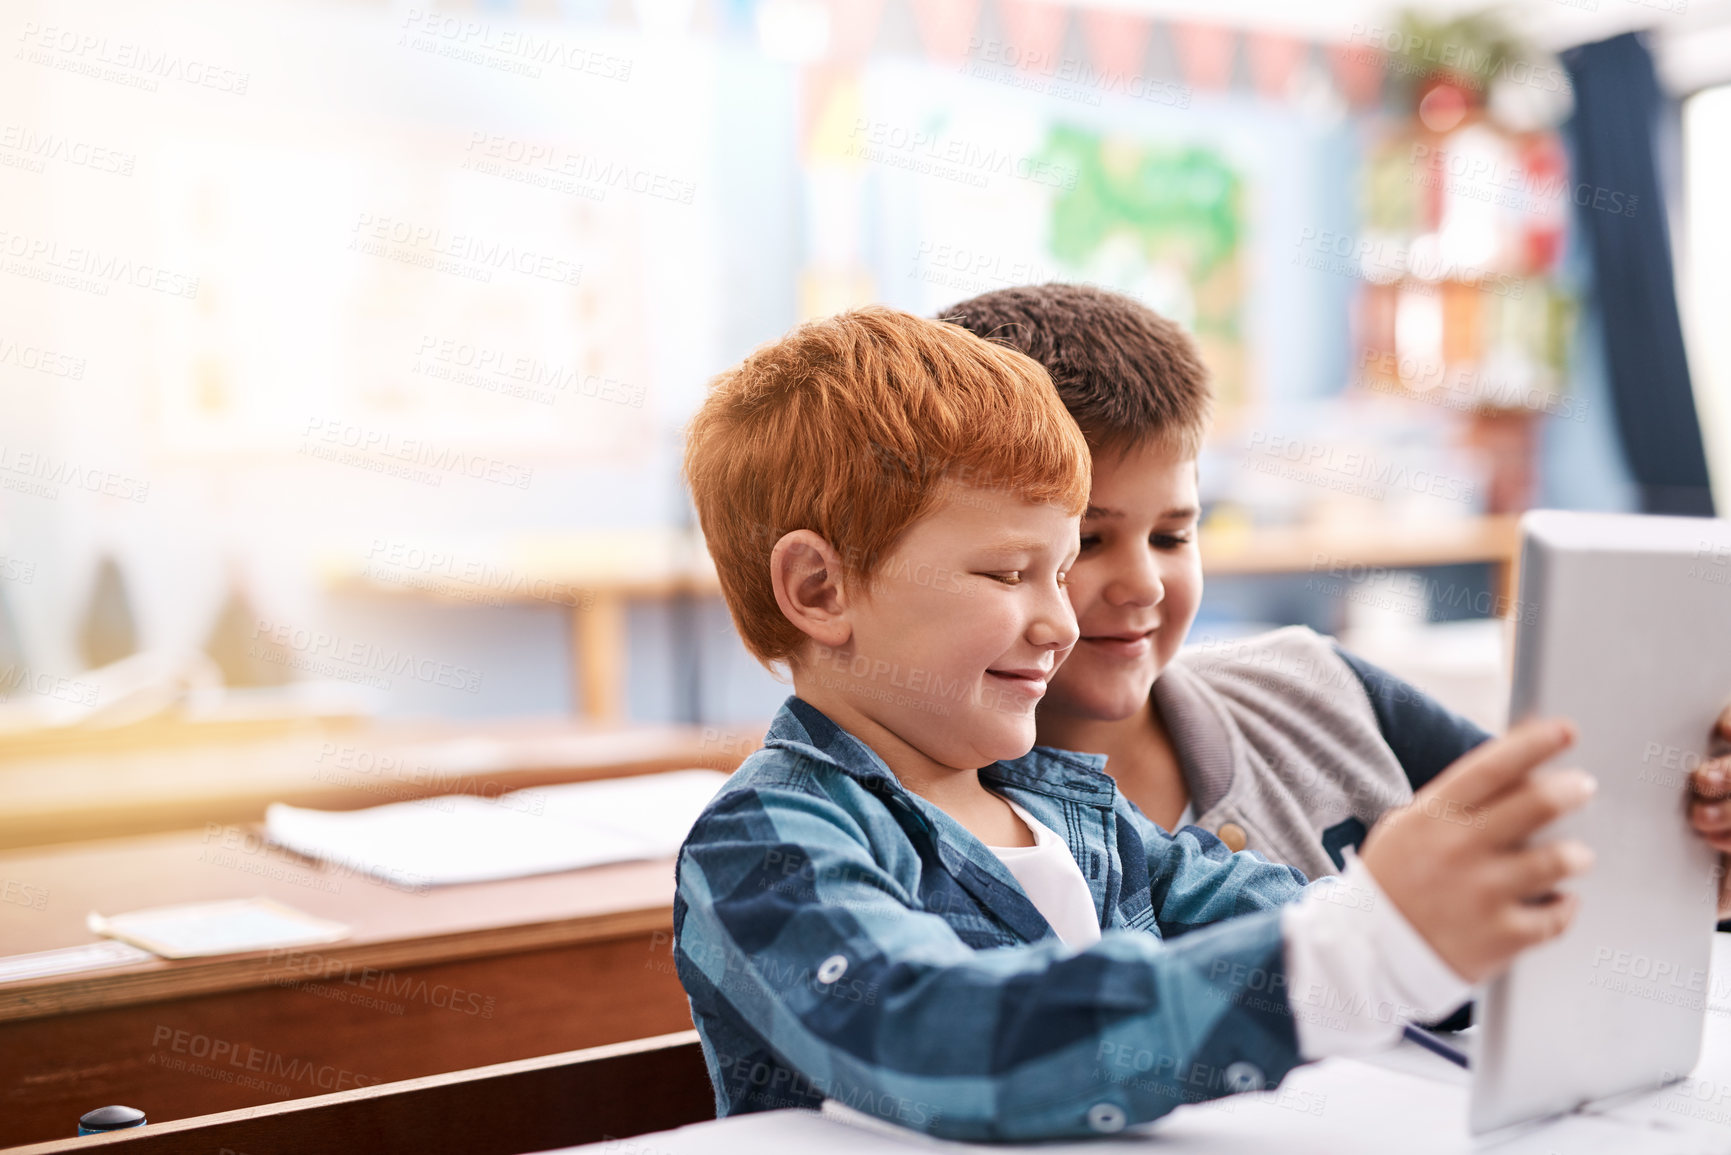 Buy stock photo Cropped shot of two elementary school children browsing on a digital tablet inside of the class during the day